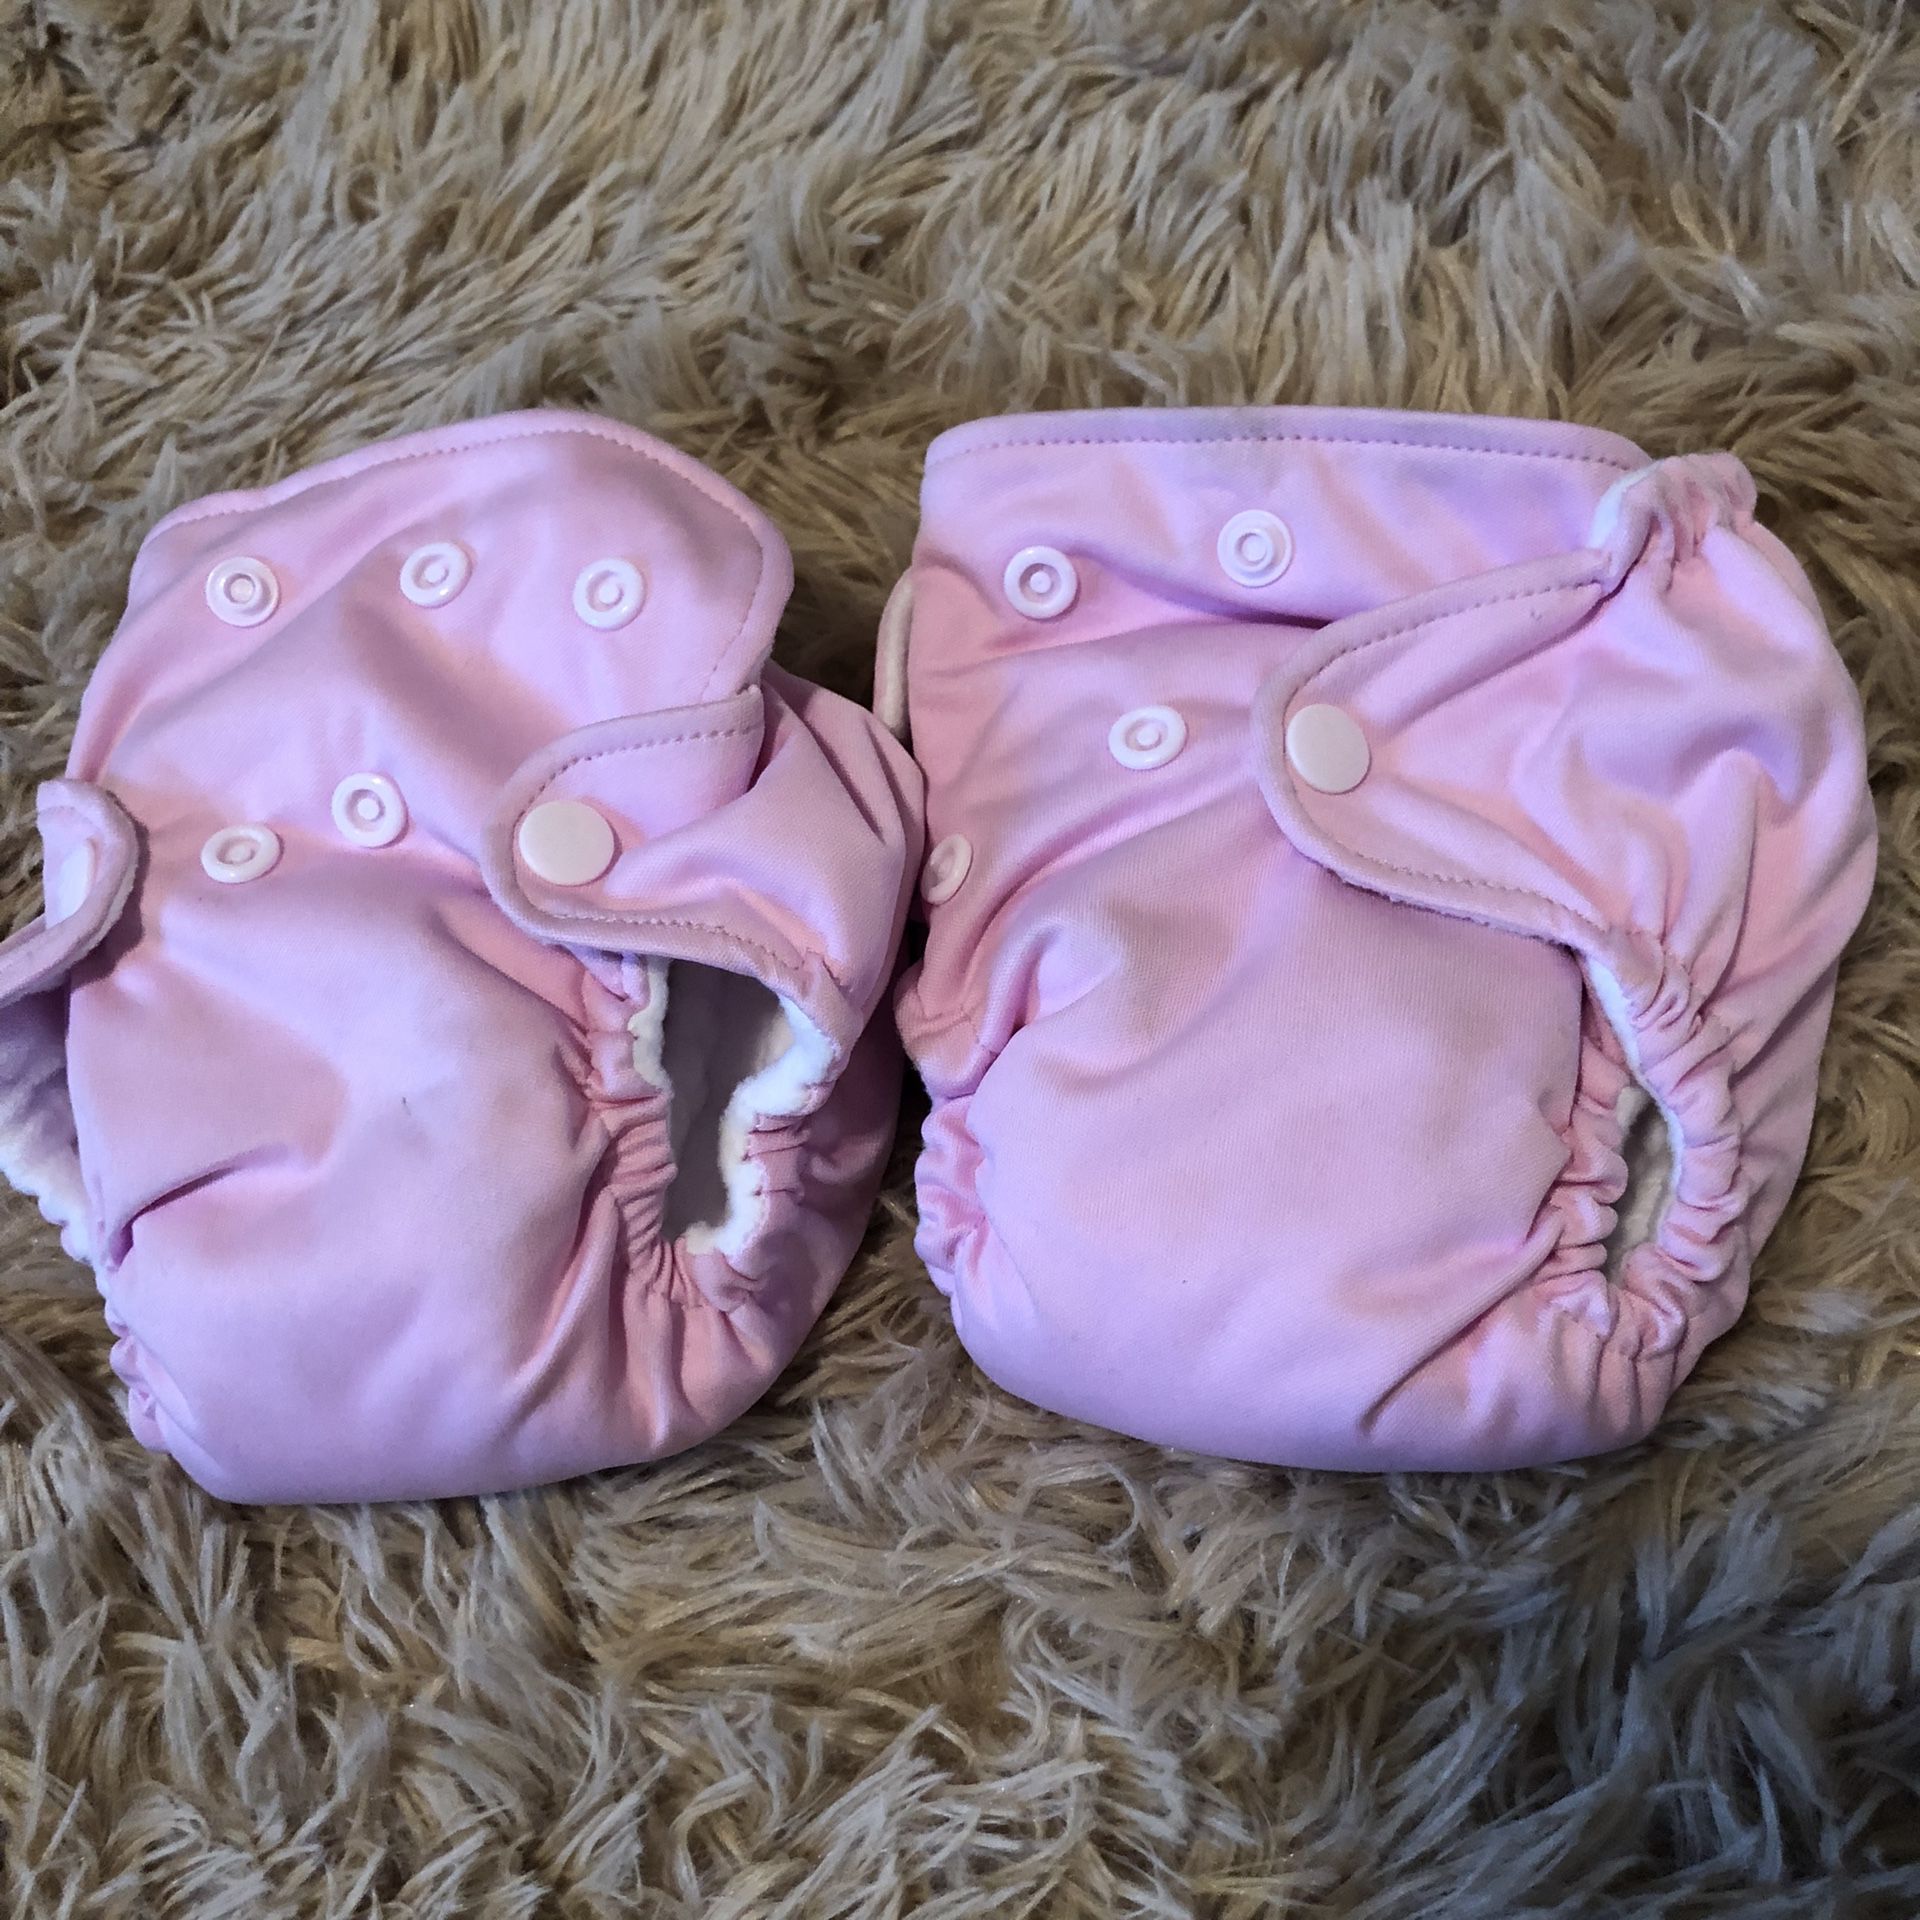 Lil Joey Cloth Diapers